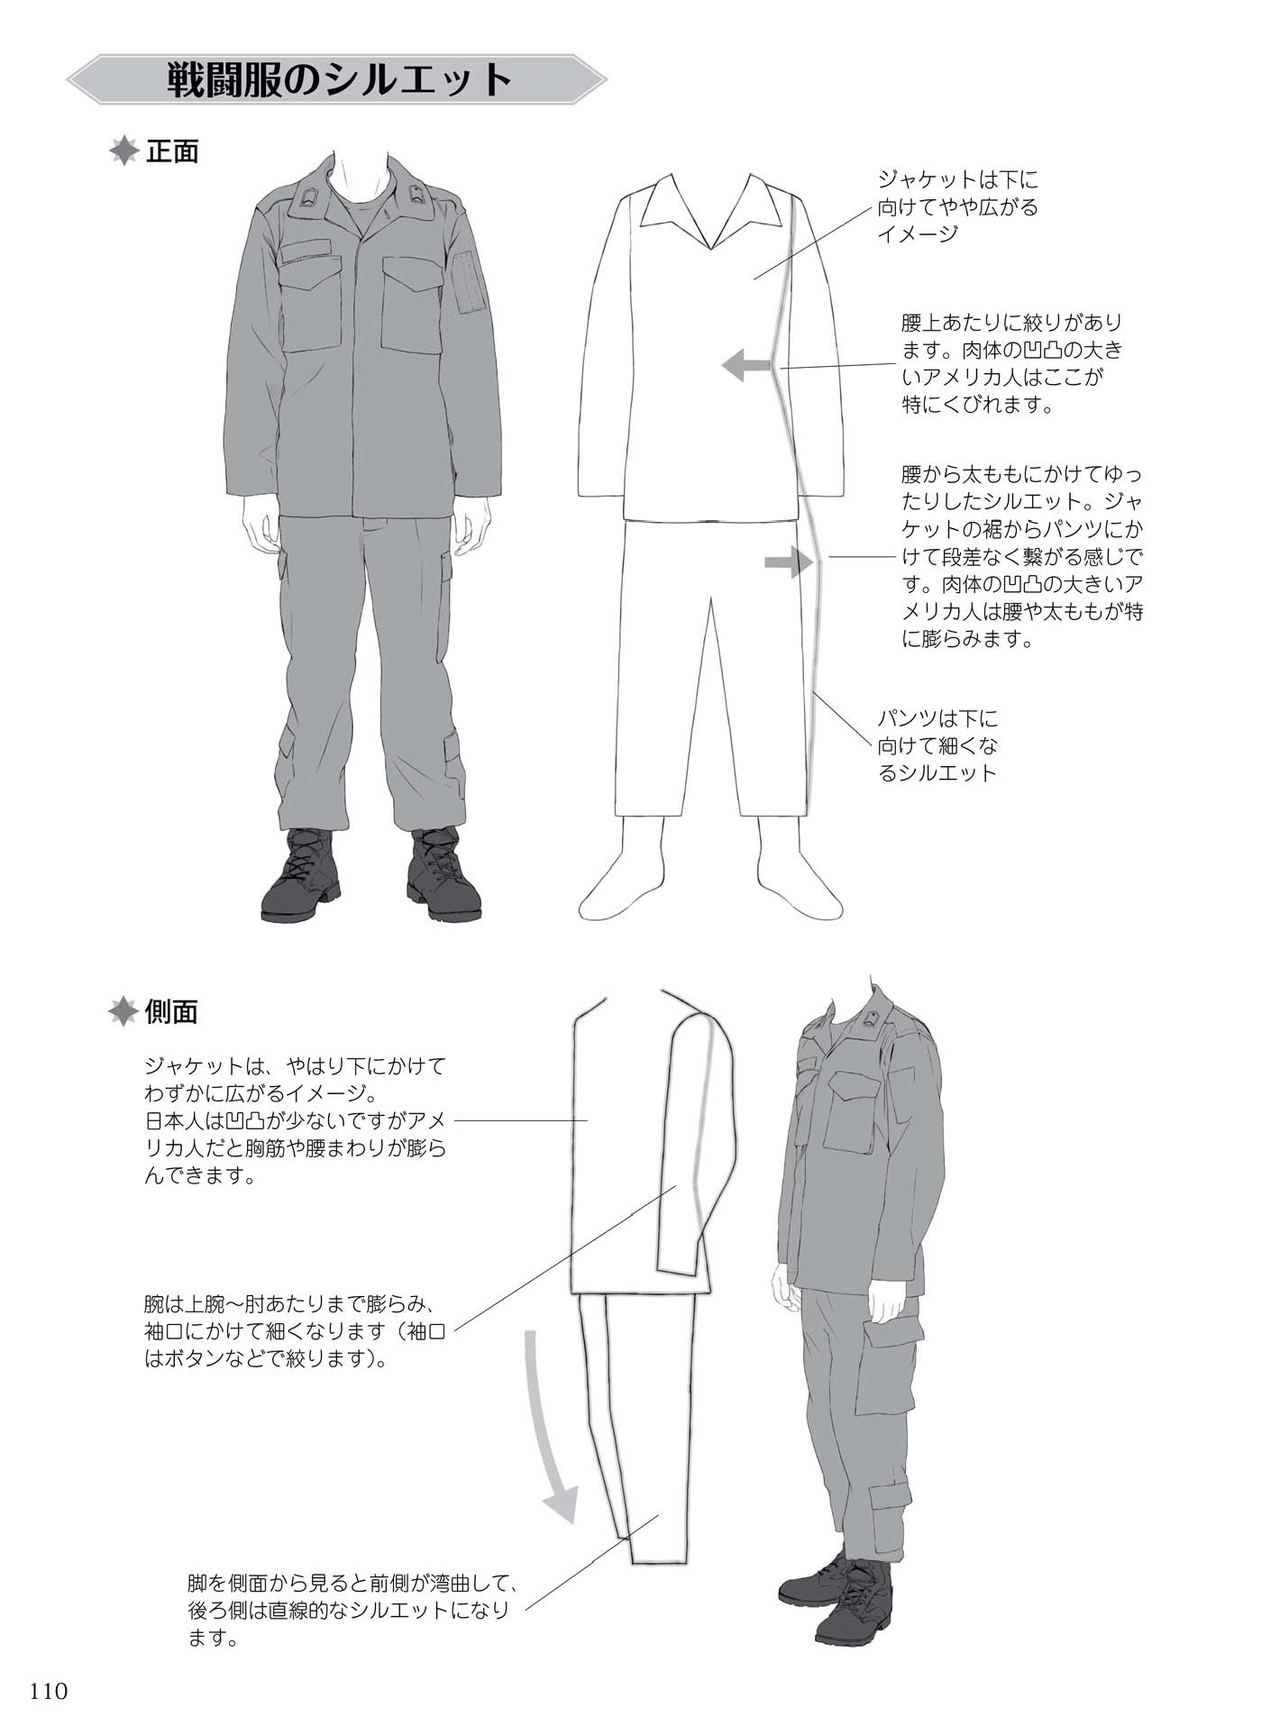 How to draw military uniforms and uniforms From Self-Defense Forces 軍服・制服の描き方 アメリカ軍・自衛隊の制服から戦闘服まで 113